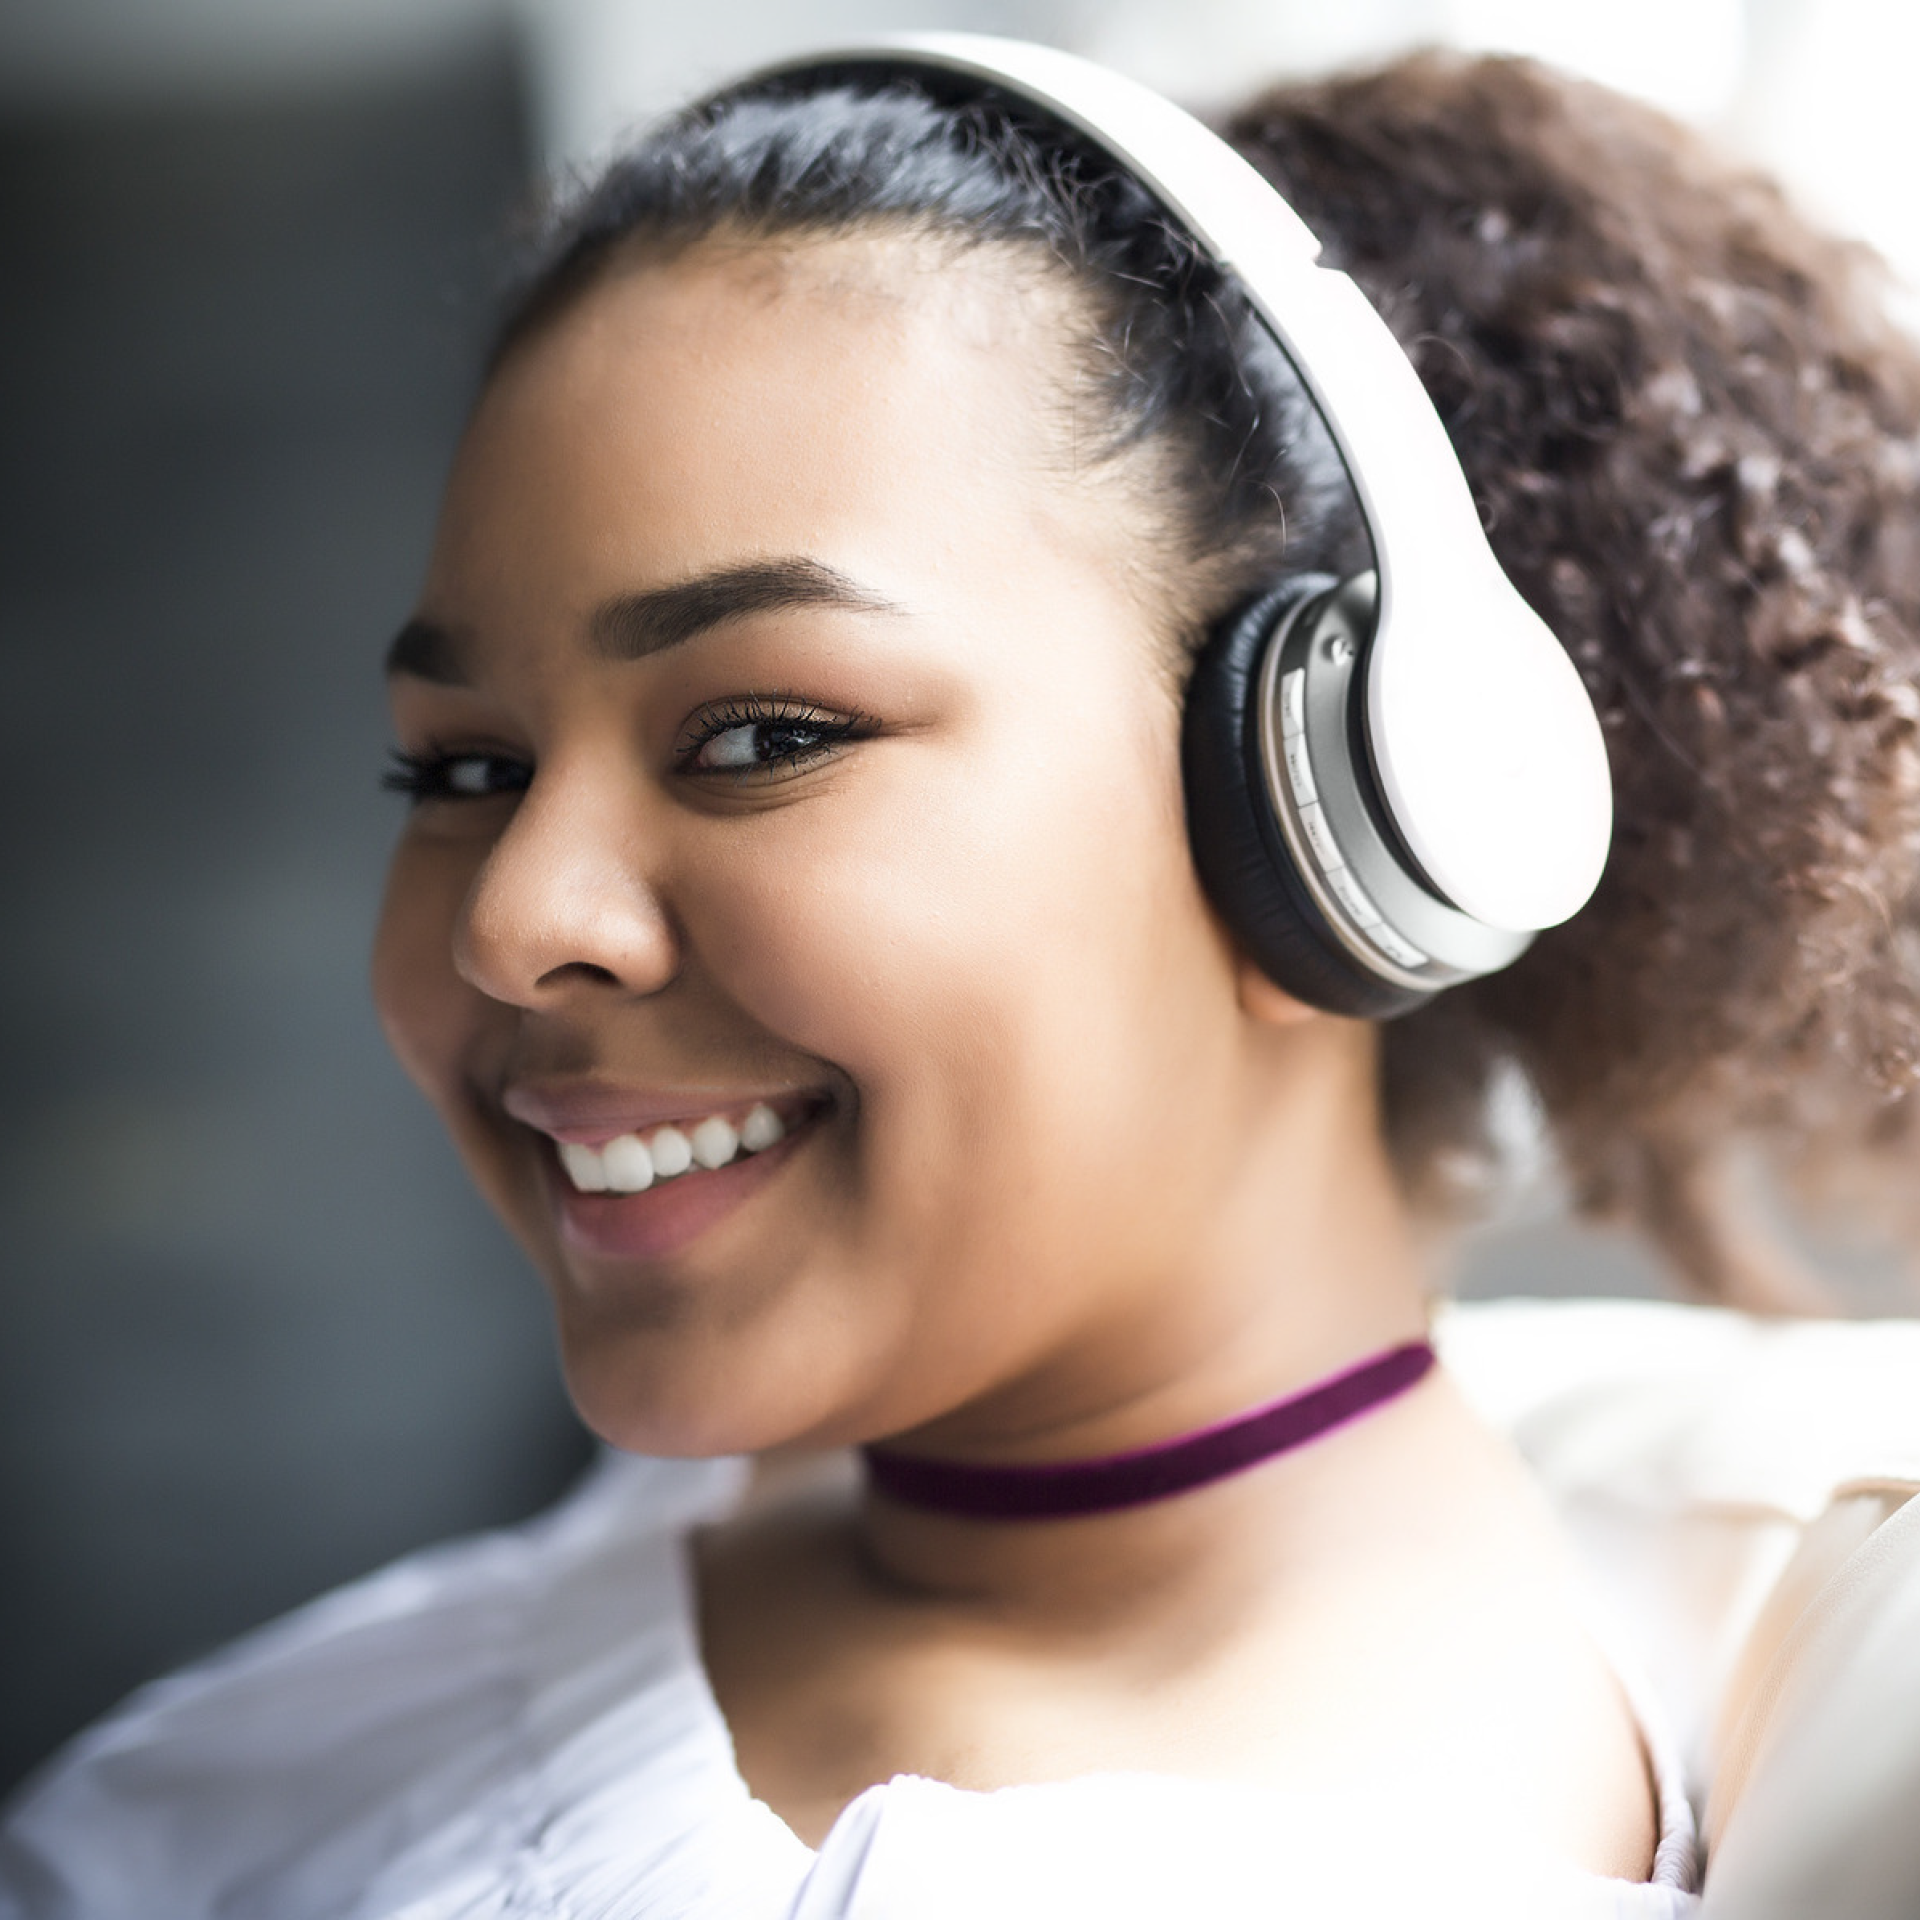 A young woman with headphones smiles happily